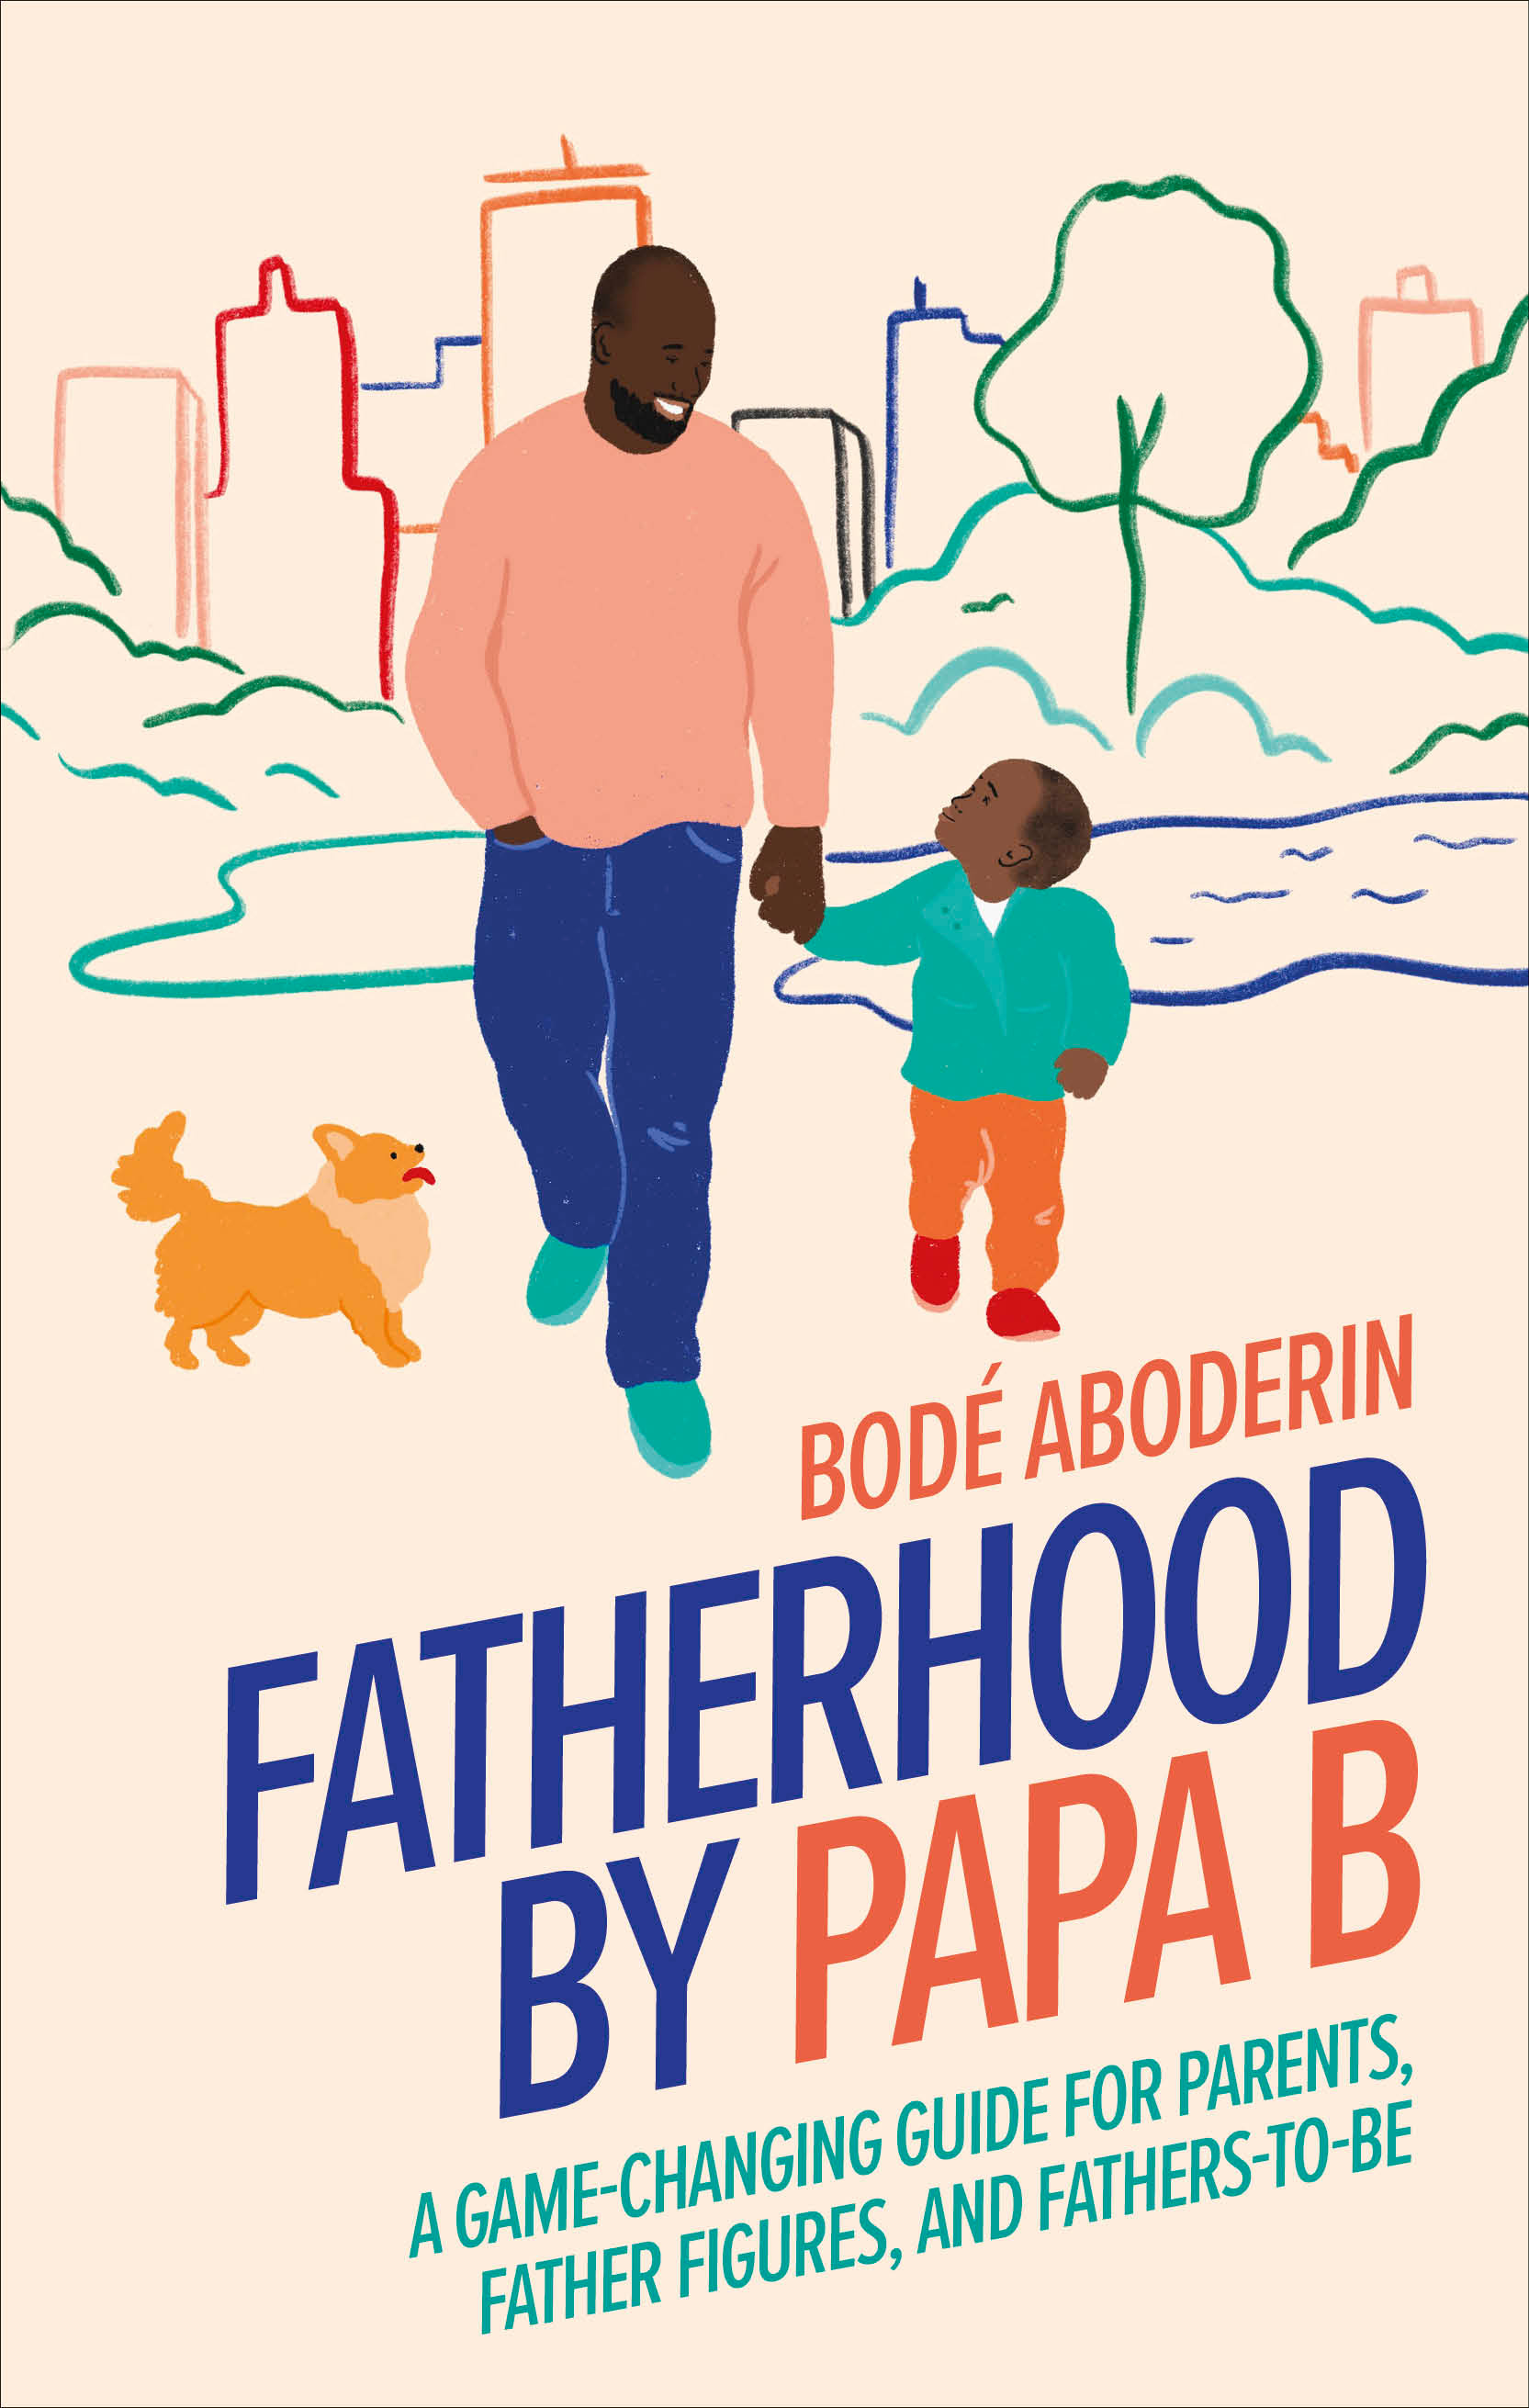 Fatherhood by Papa B : A Game-changing Guide for Parents, Father Figures and Fathers-to-be | Aboderin, Bode